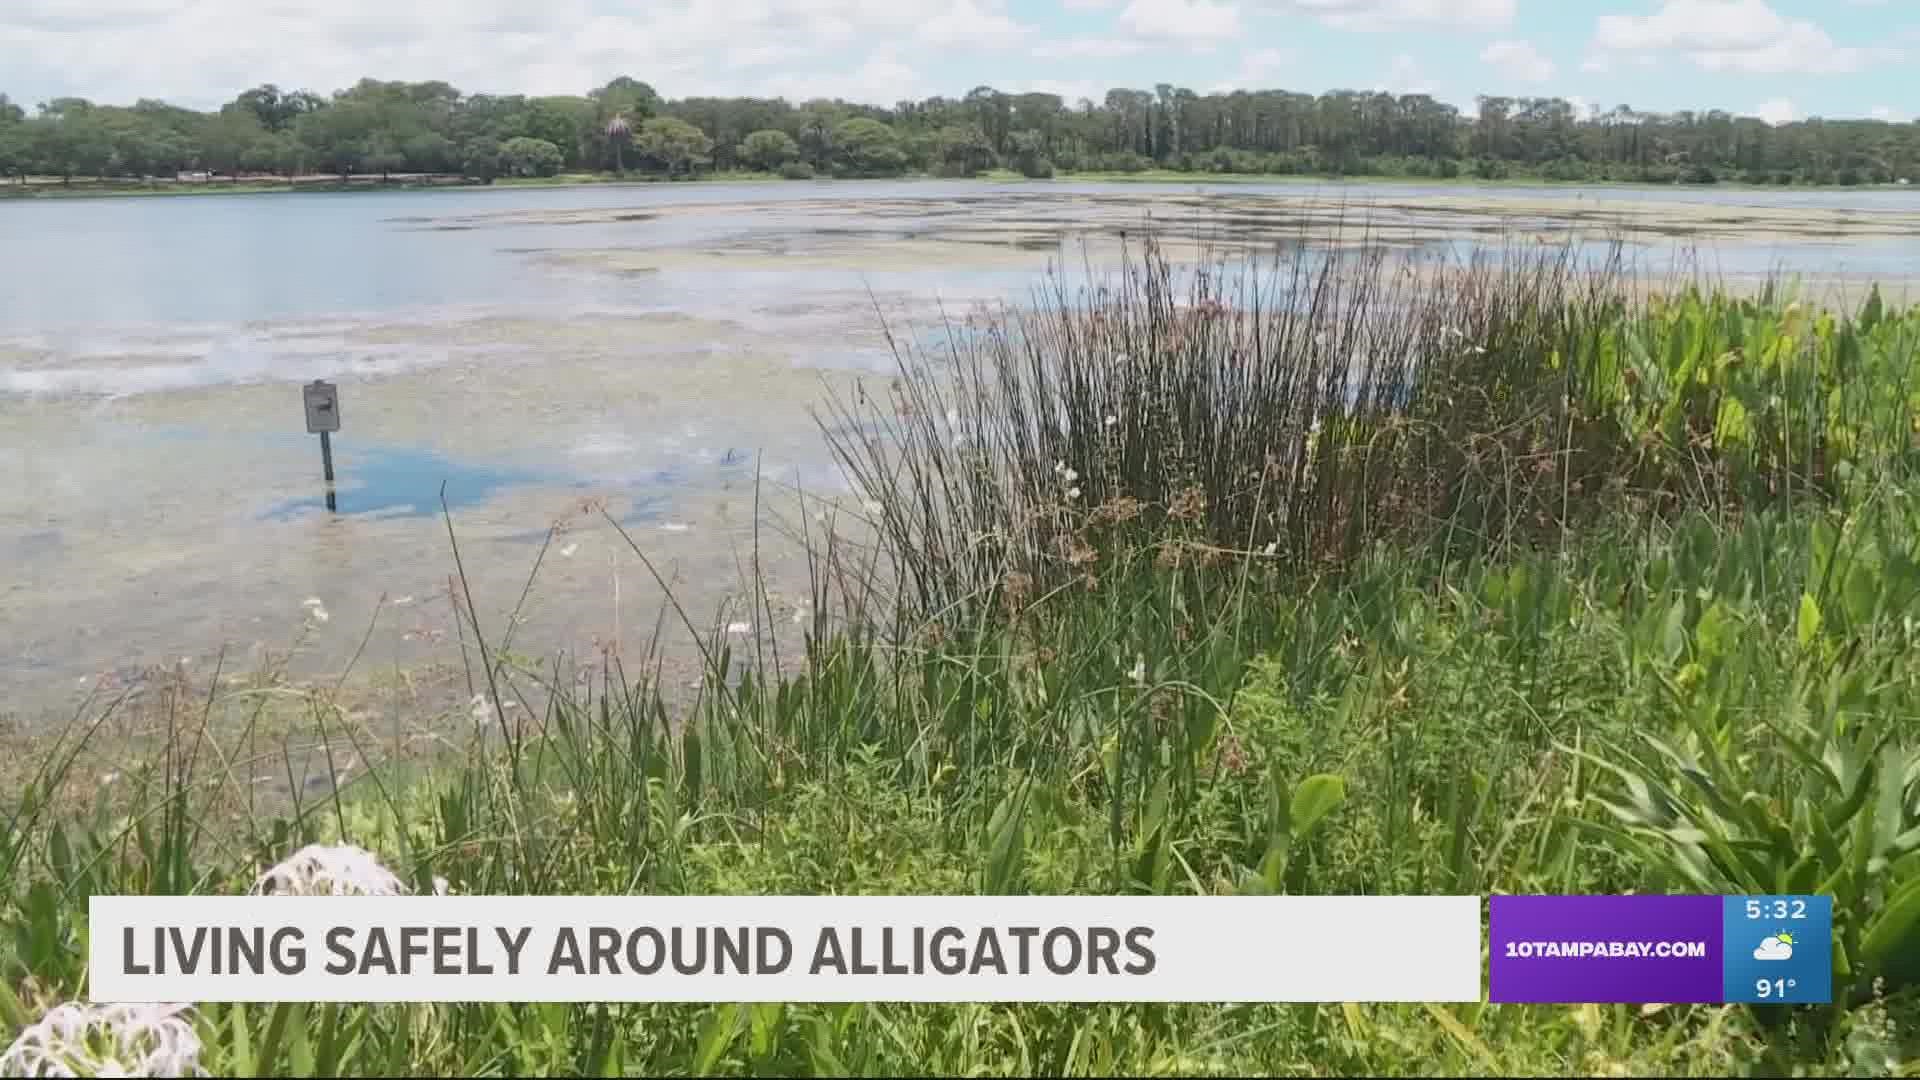 FWC says two alligators were humanely killed, and officials don't plan to remove any other gators from the area.